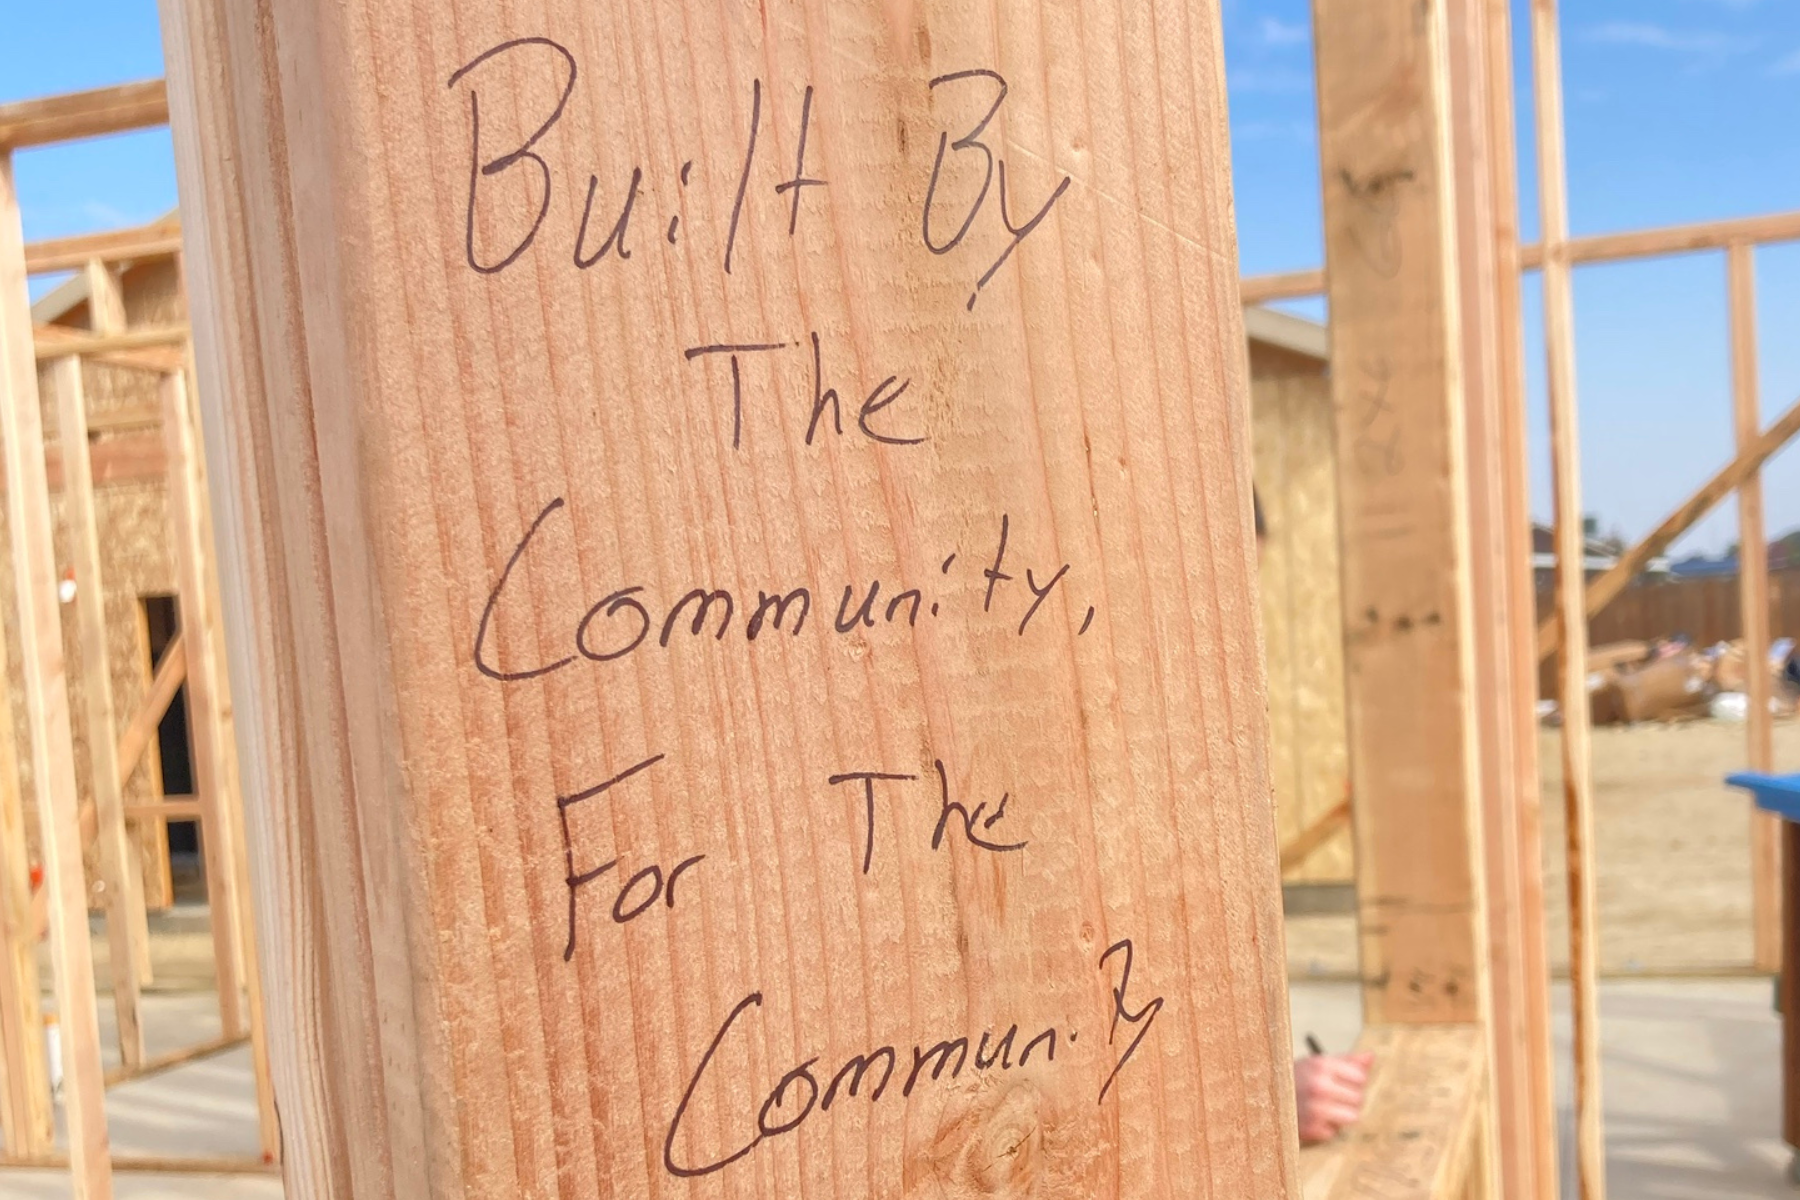 Wooden stud with "built by the community, for the community" written on it in marker